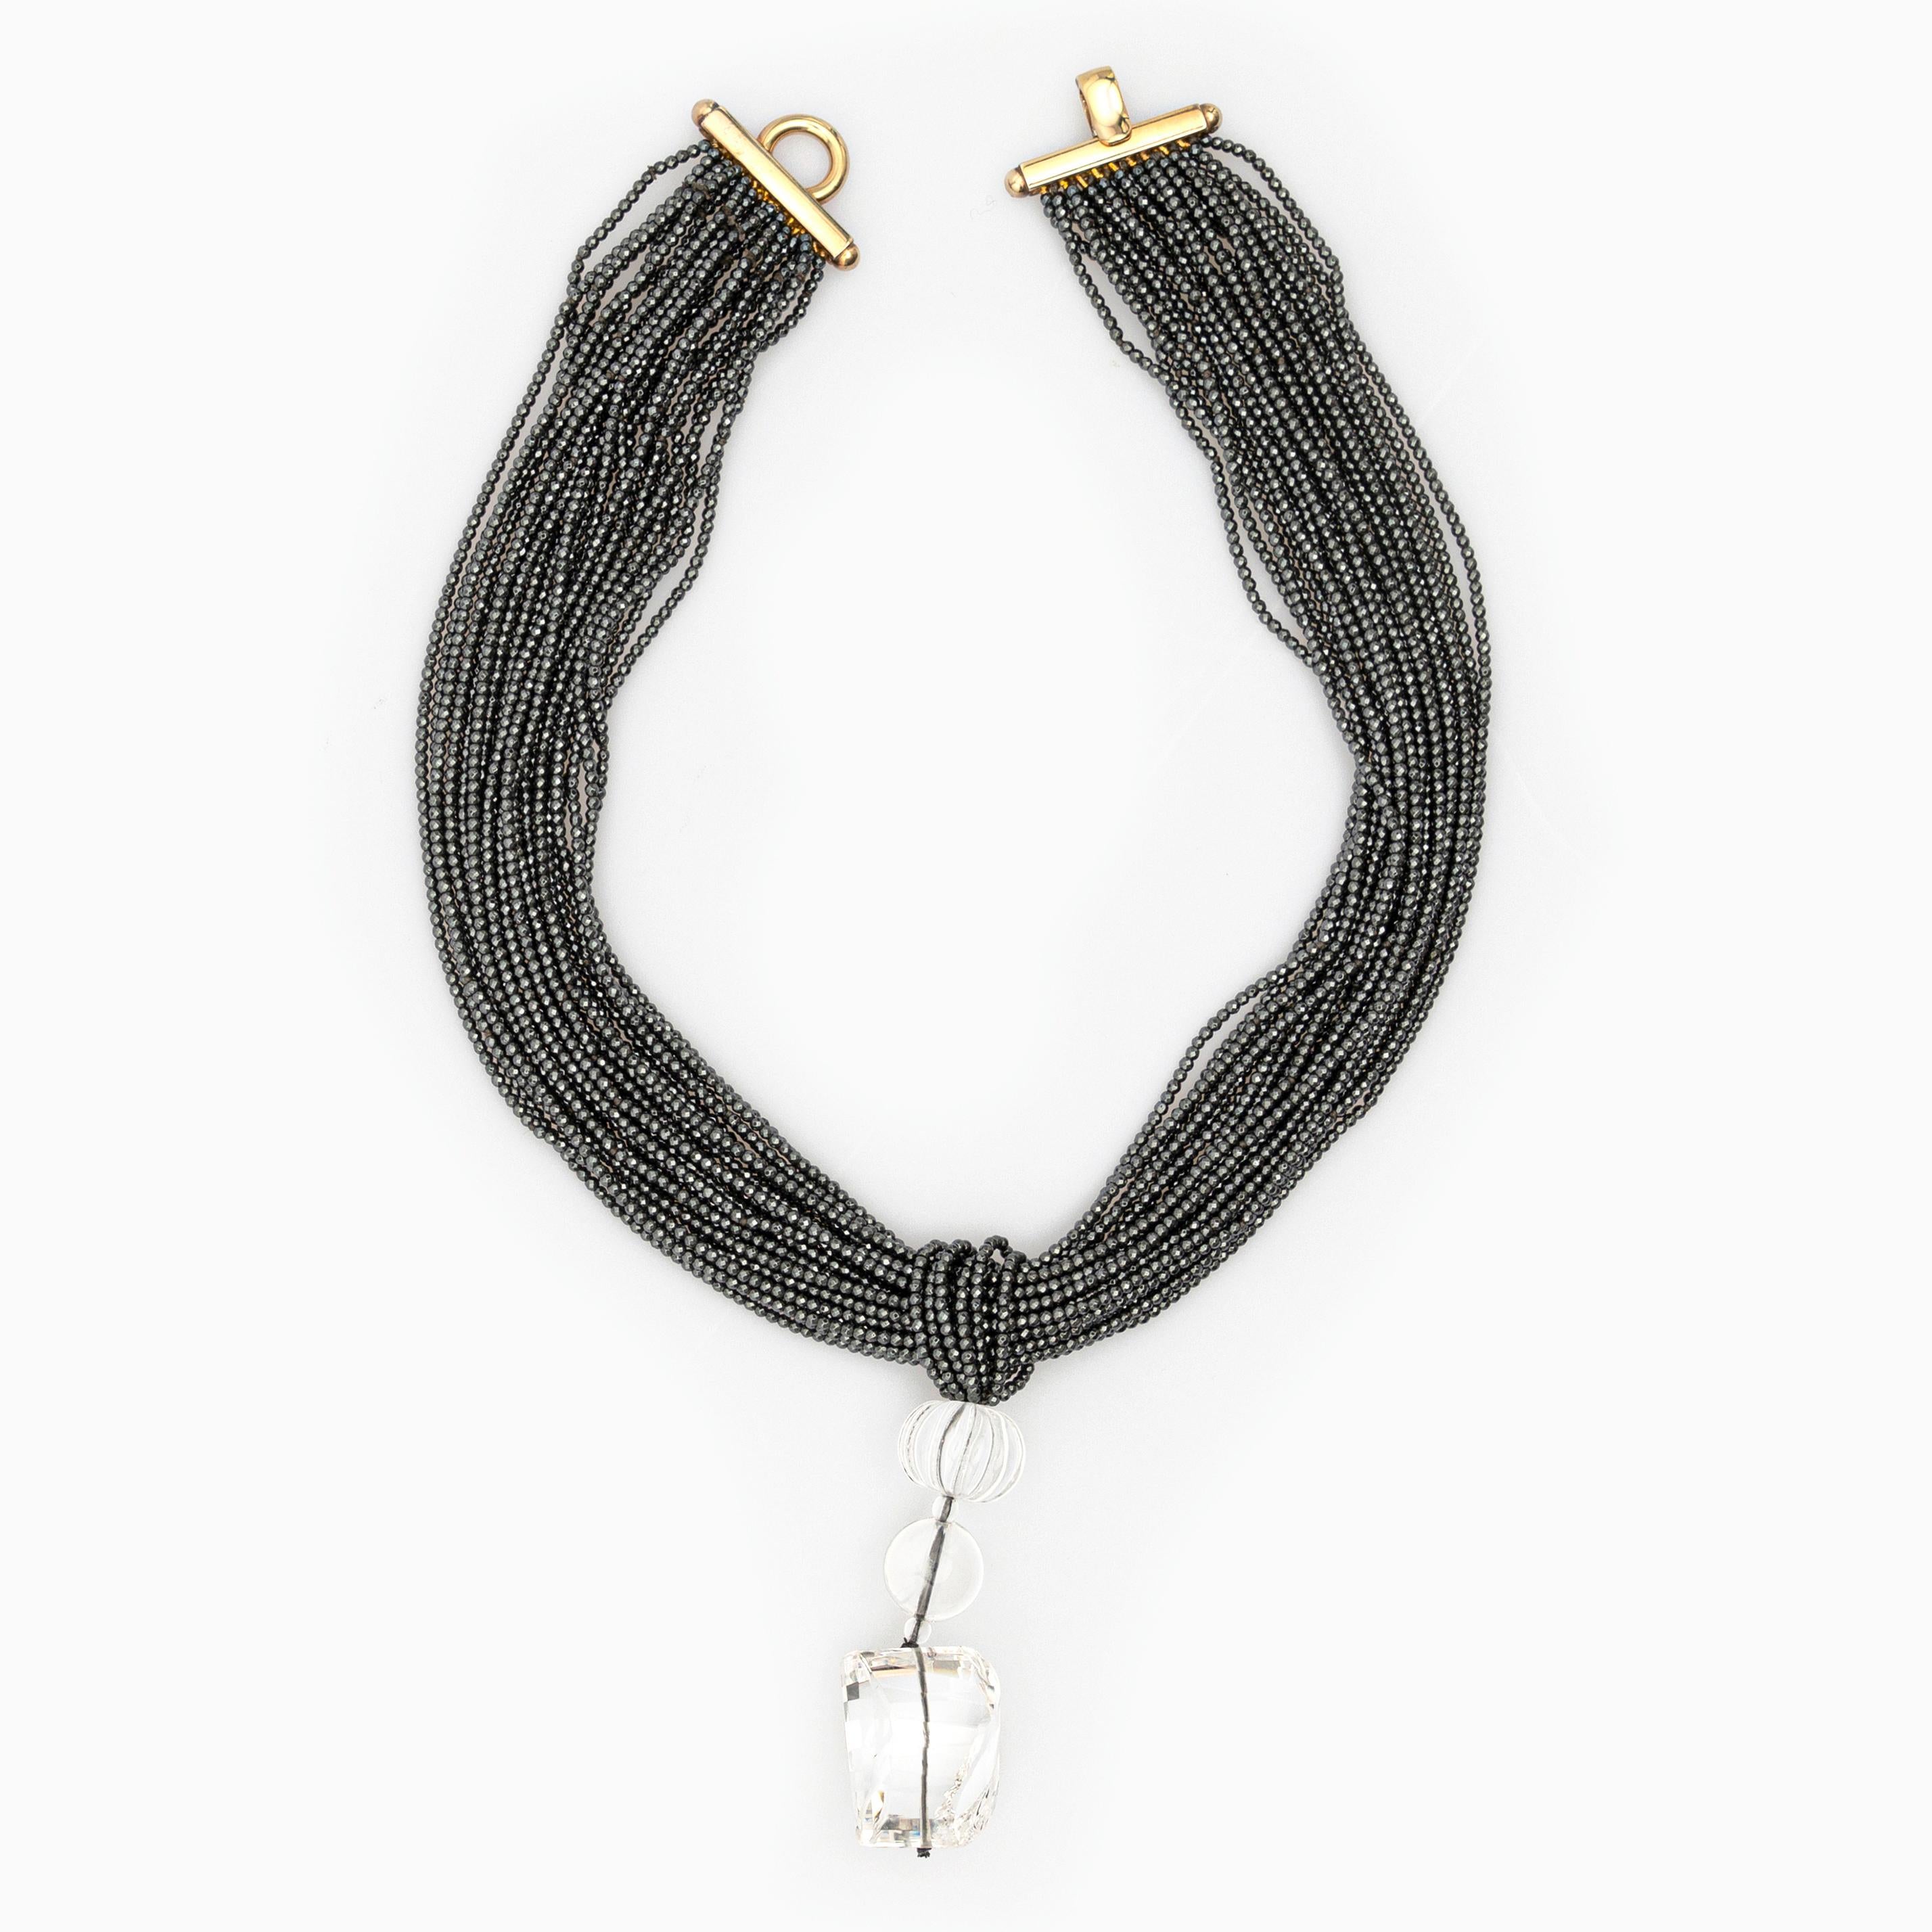 Hematite Rock Crystal Pendant 925 Gilded Silver Multi Strand Beaded Necklace In New Condition For Sale In Milano, IT